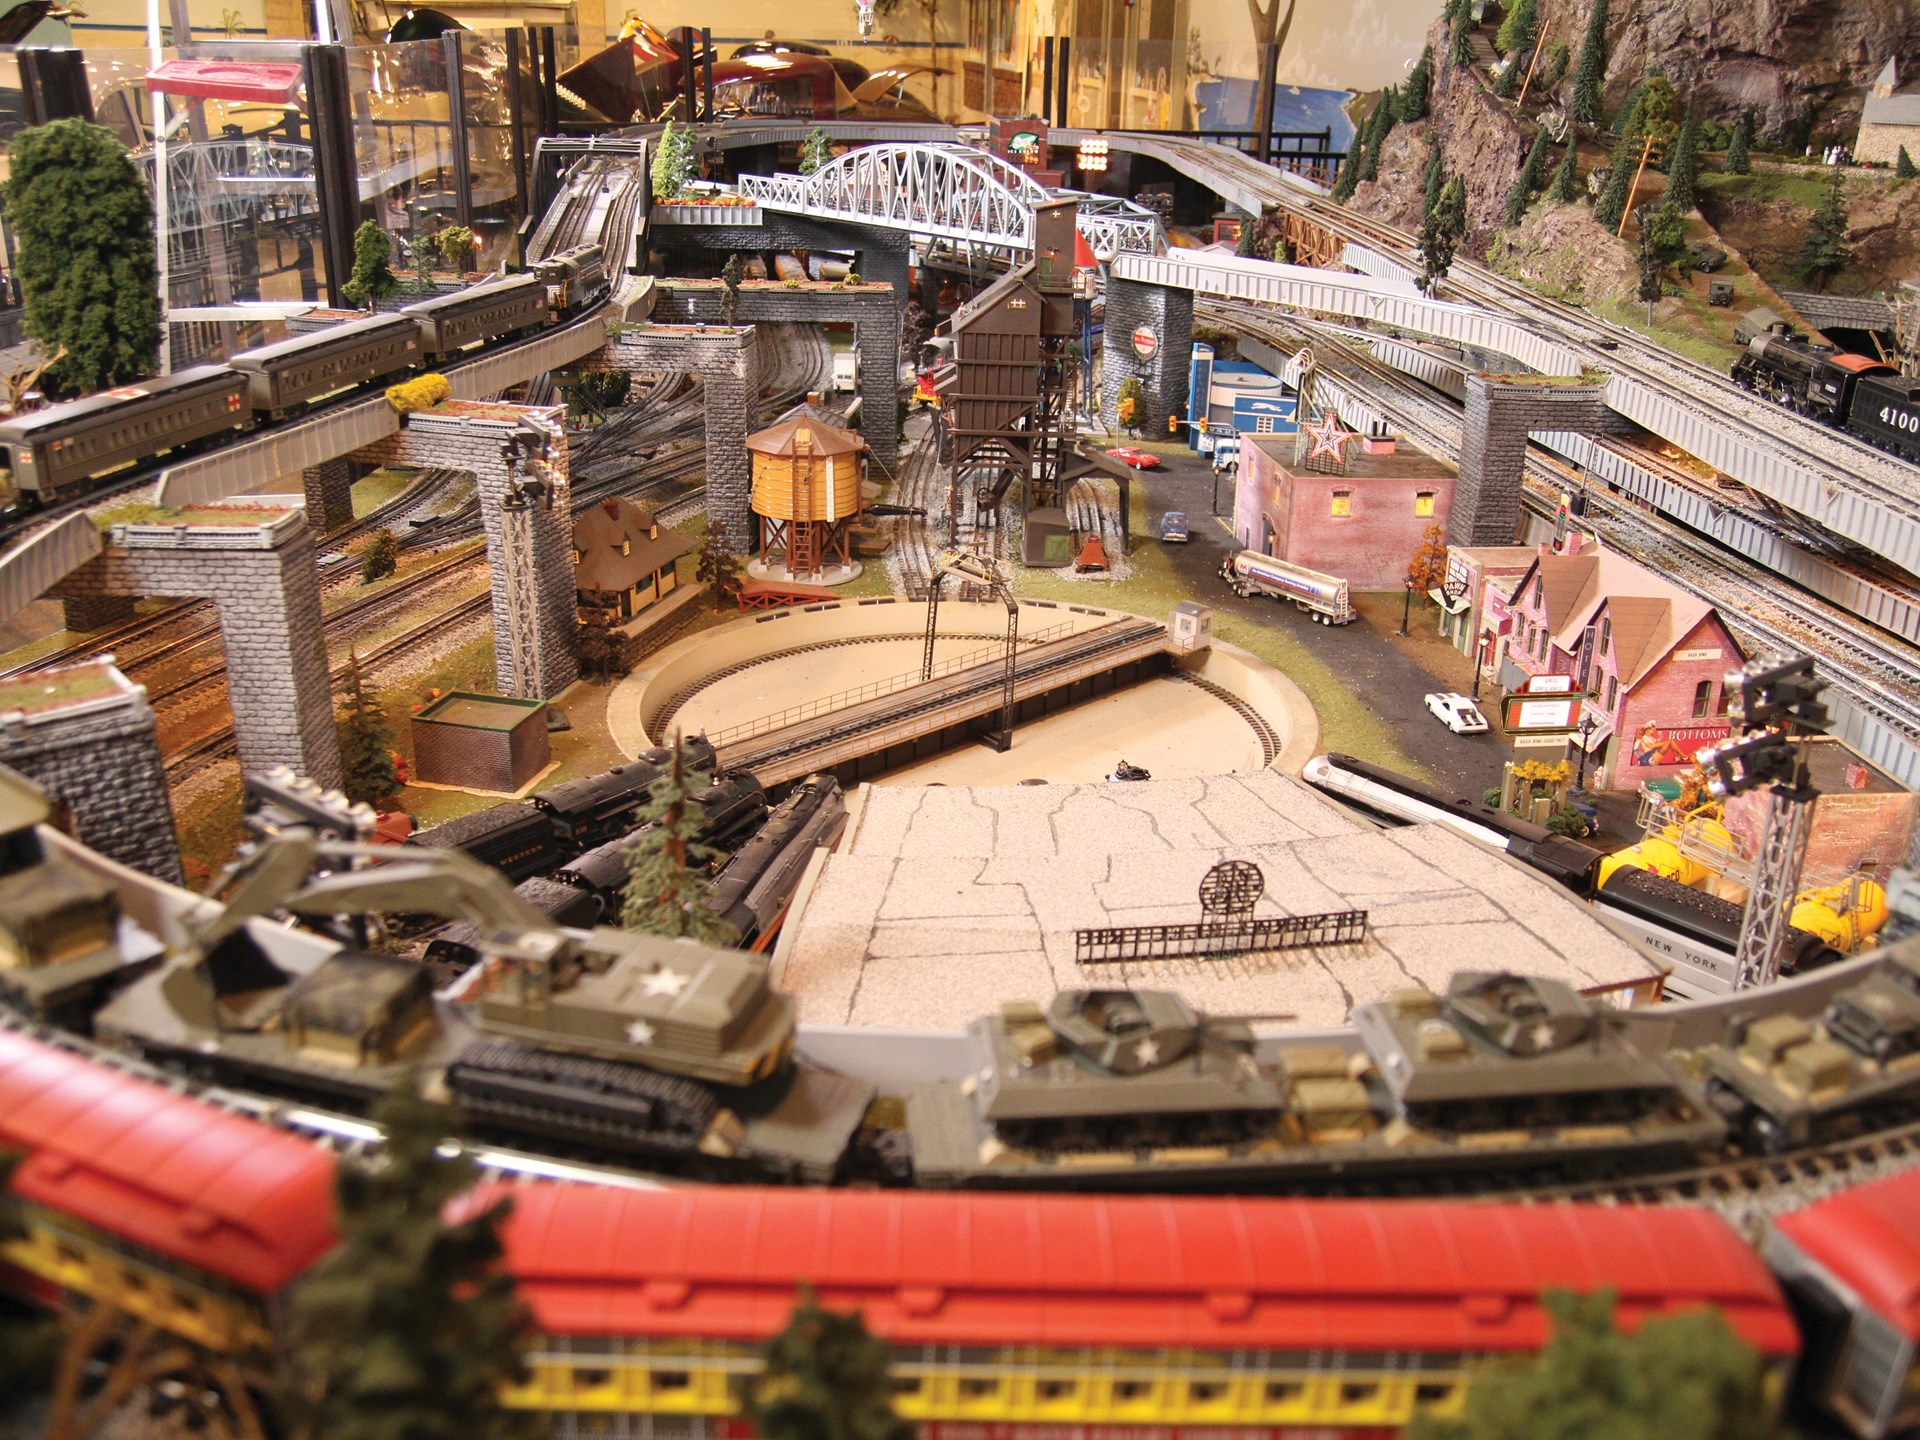 RM Sotheby's - Large-Scale Lionel Train Layout | The John Staluppi